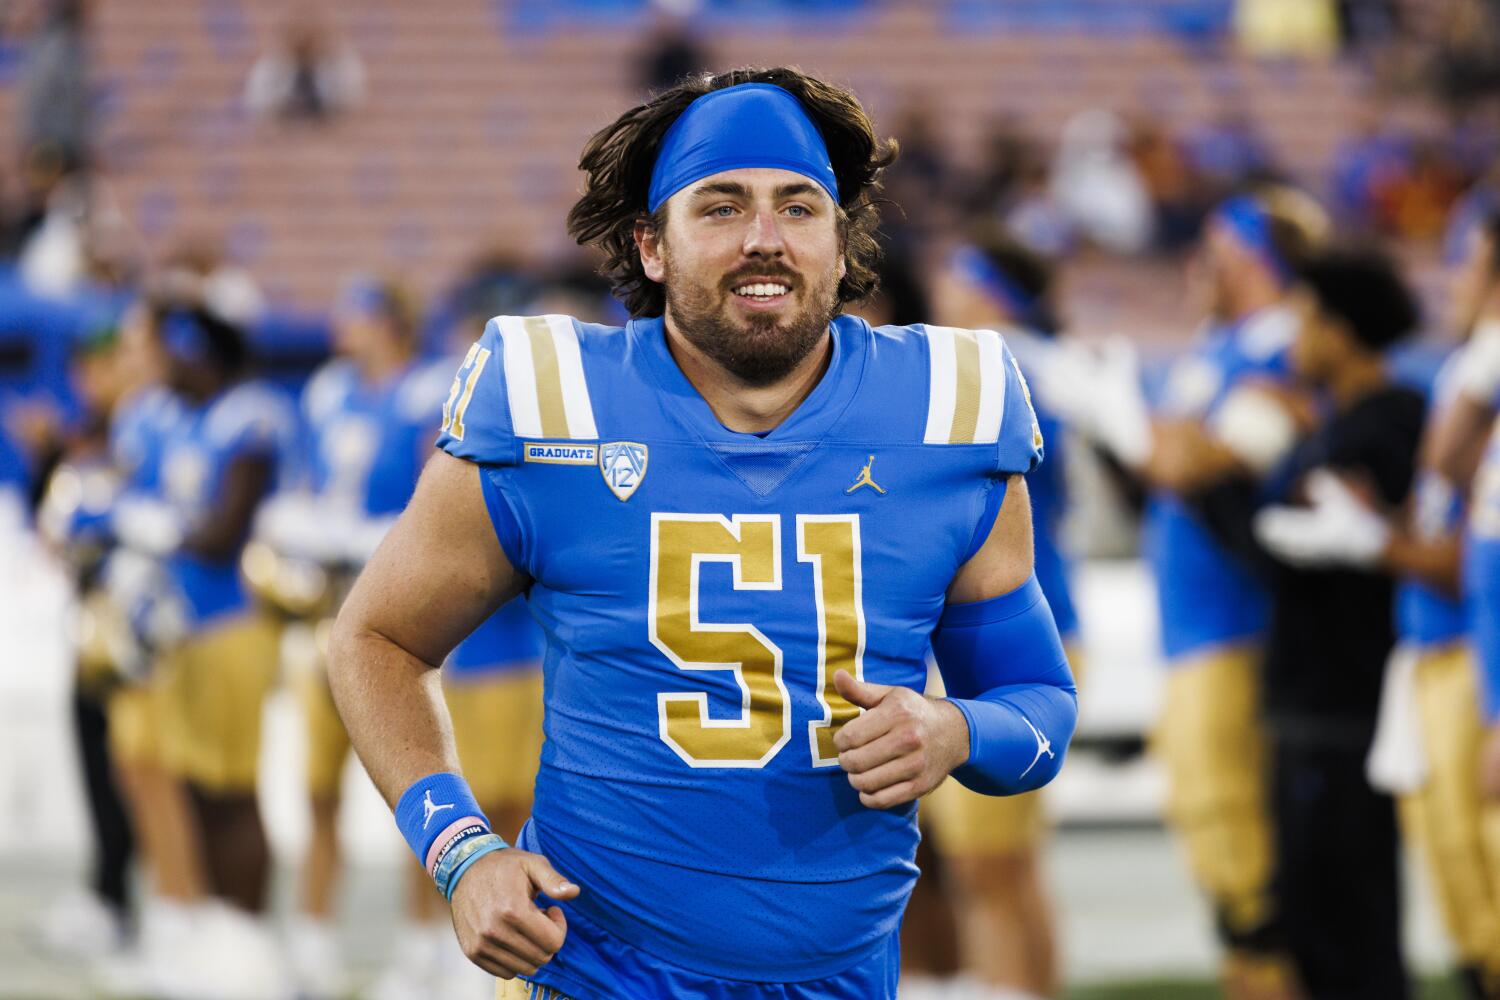 Commentary: UCLA long snapper Jack Landherr is a quiet star and role model for the Bruins